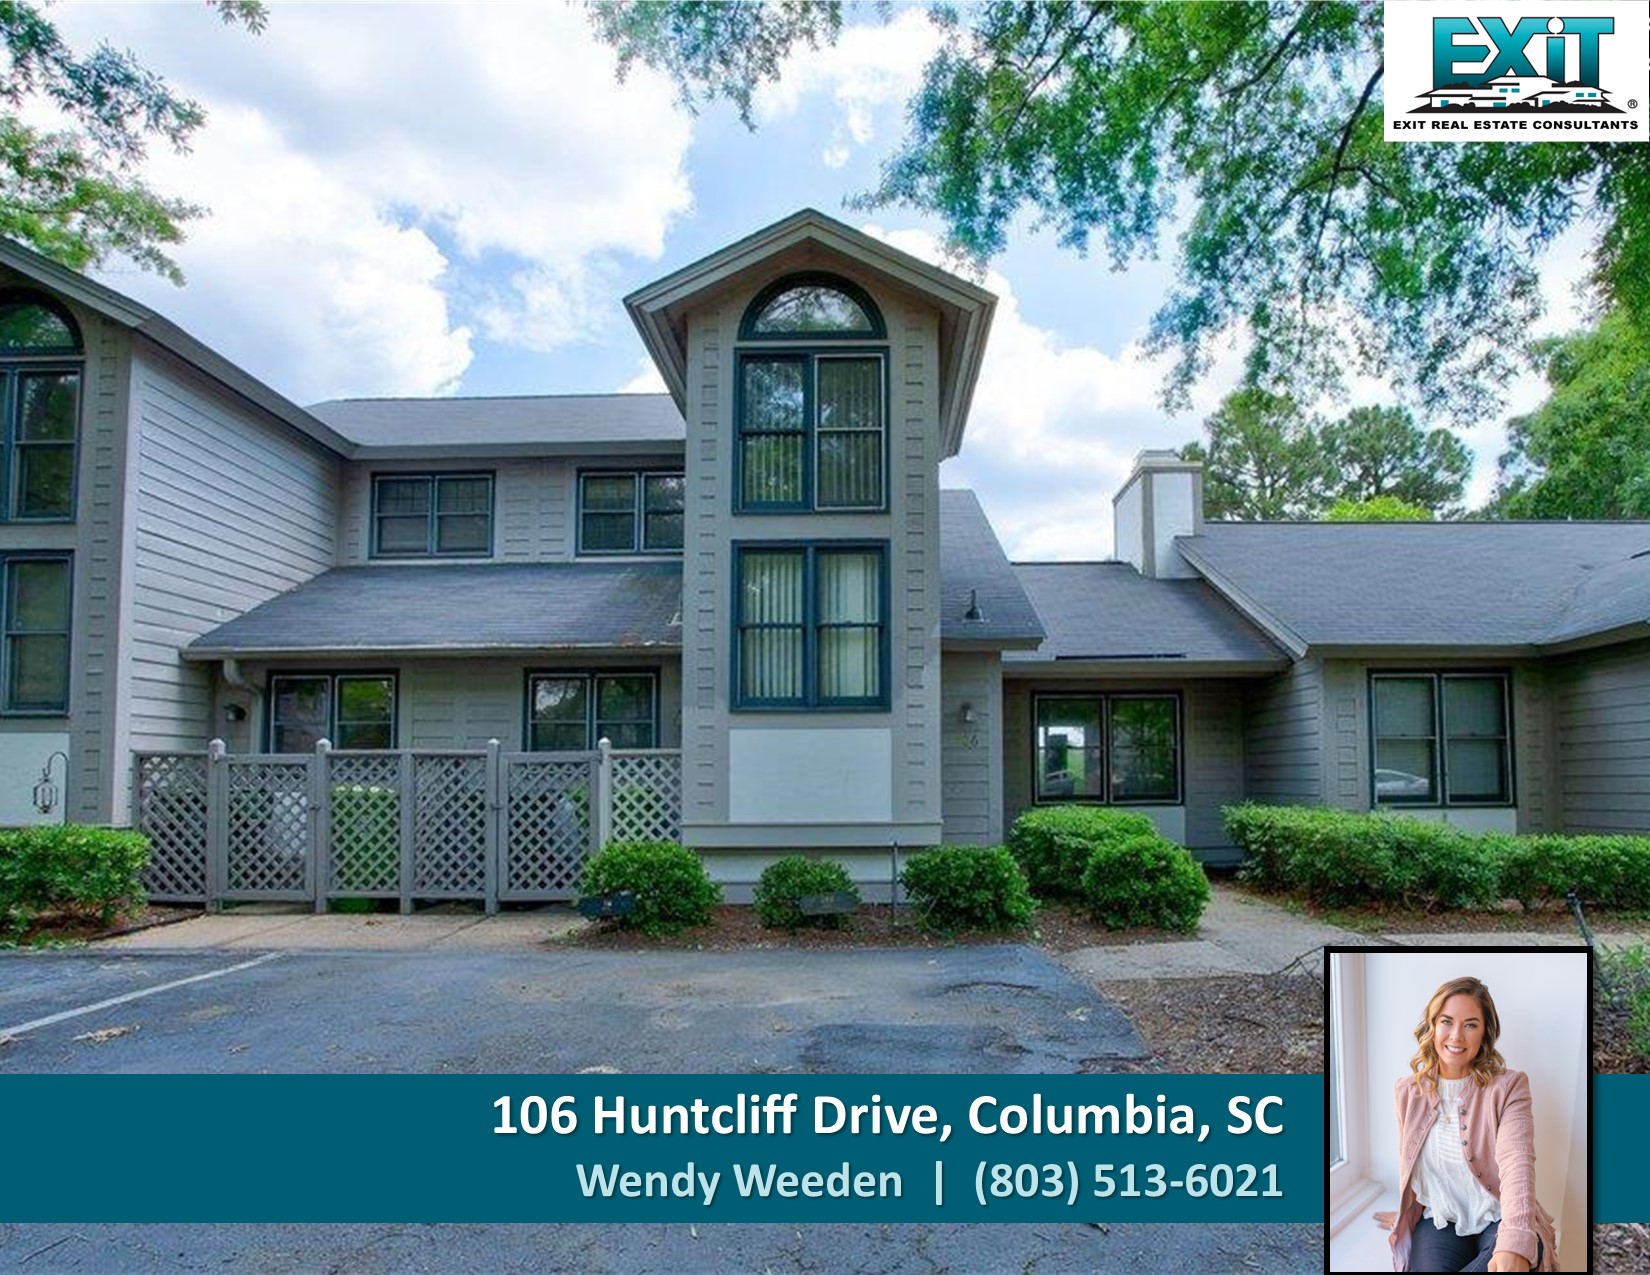 Just listed in Huntcliff